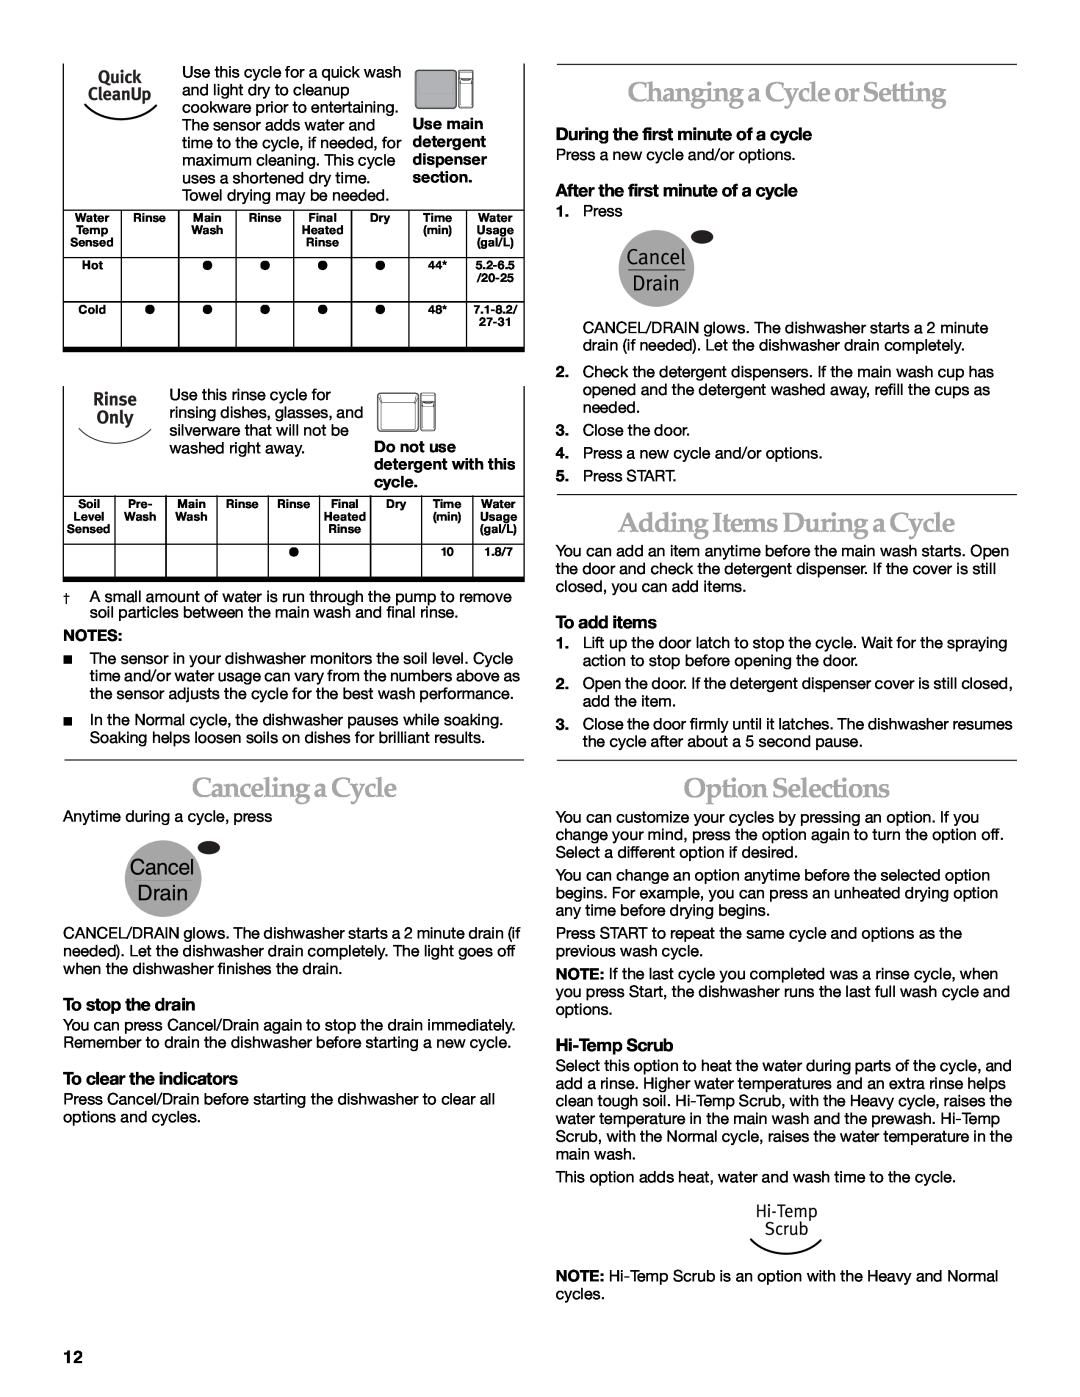 KitchenAid KUDR01TJ manual Changing a Cycle or Setting, Adding Items During a Cycle, Canceling a Cycle, Option Selections 